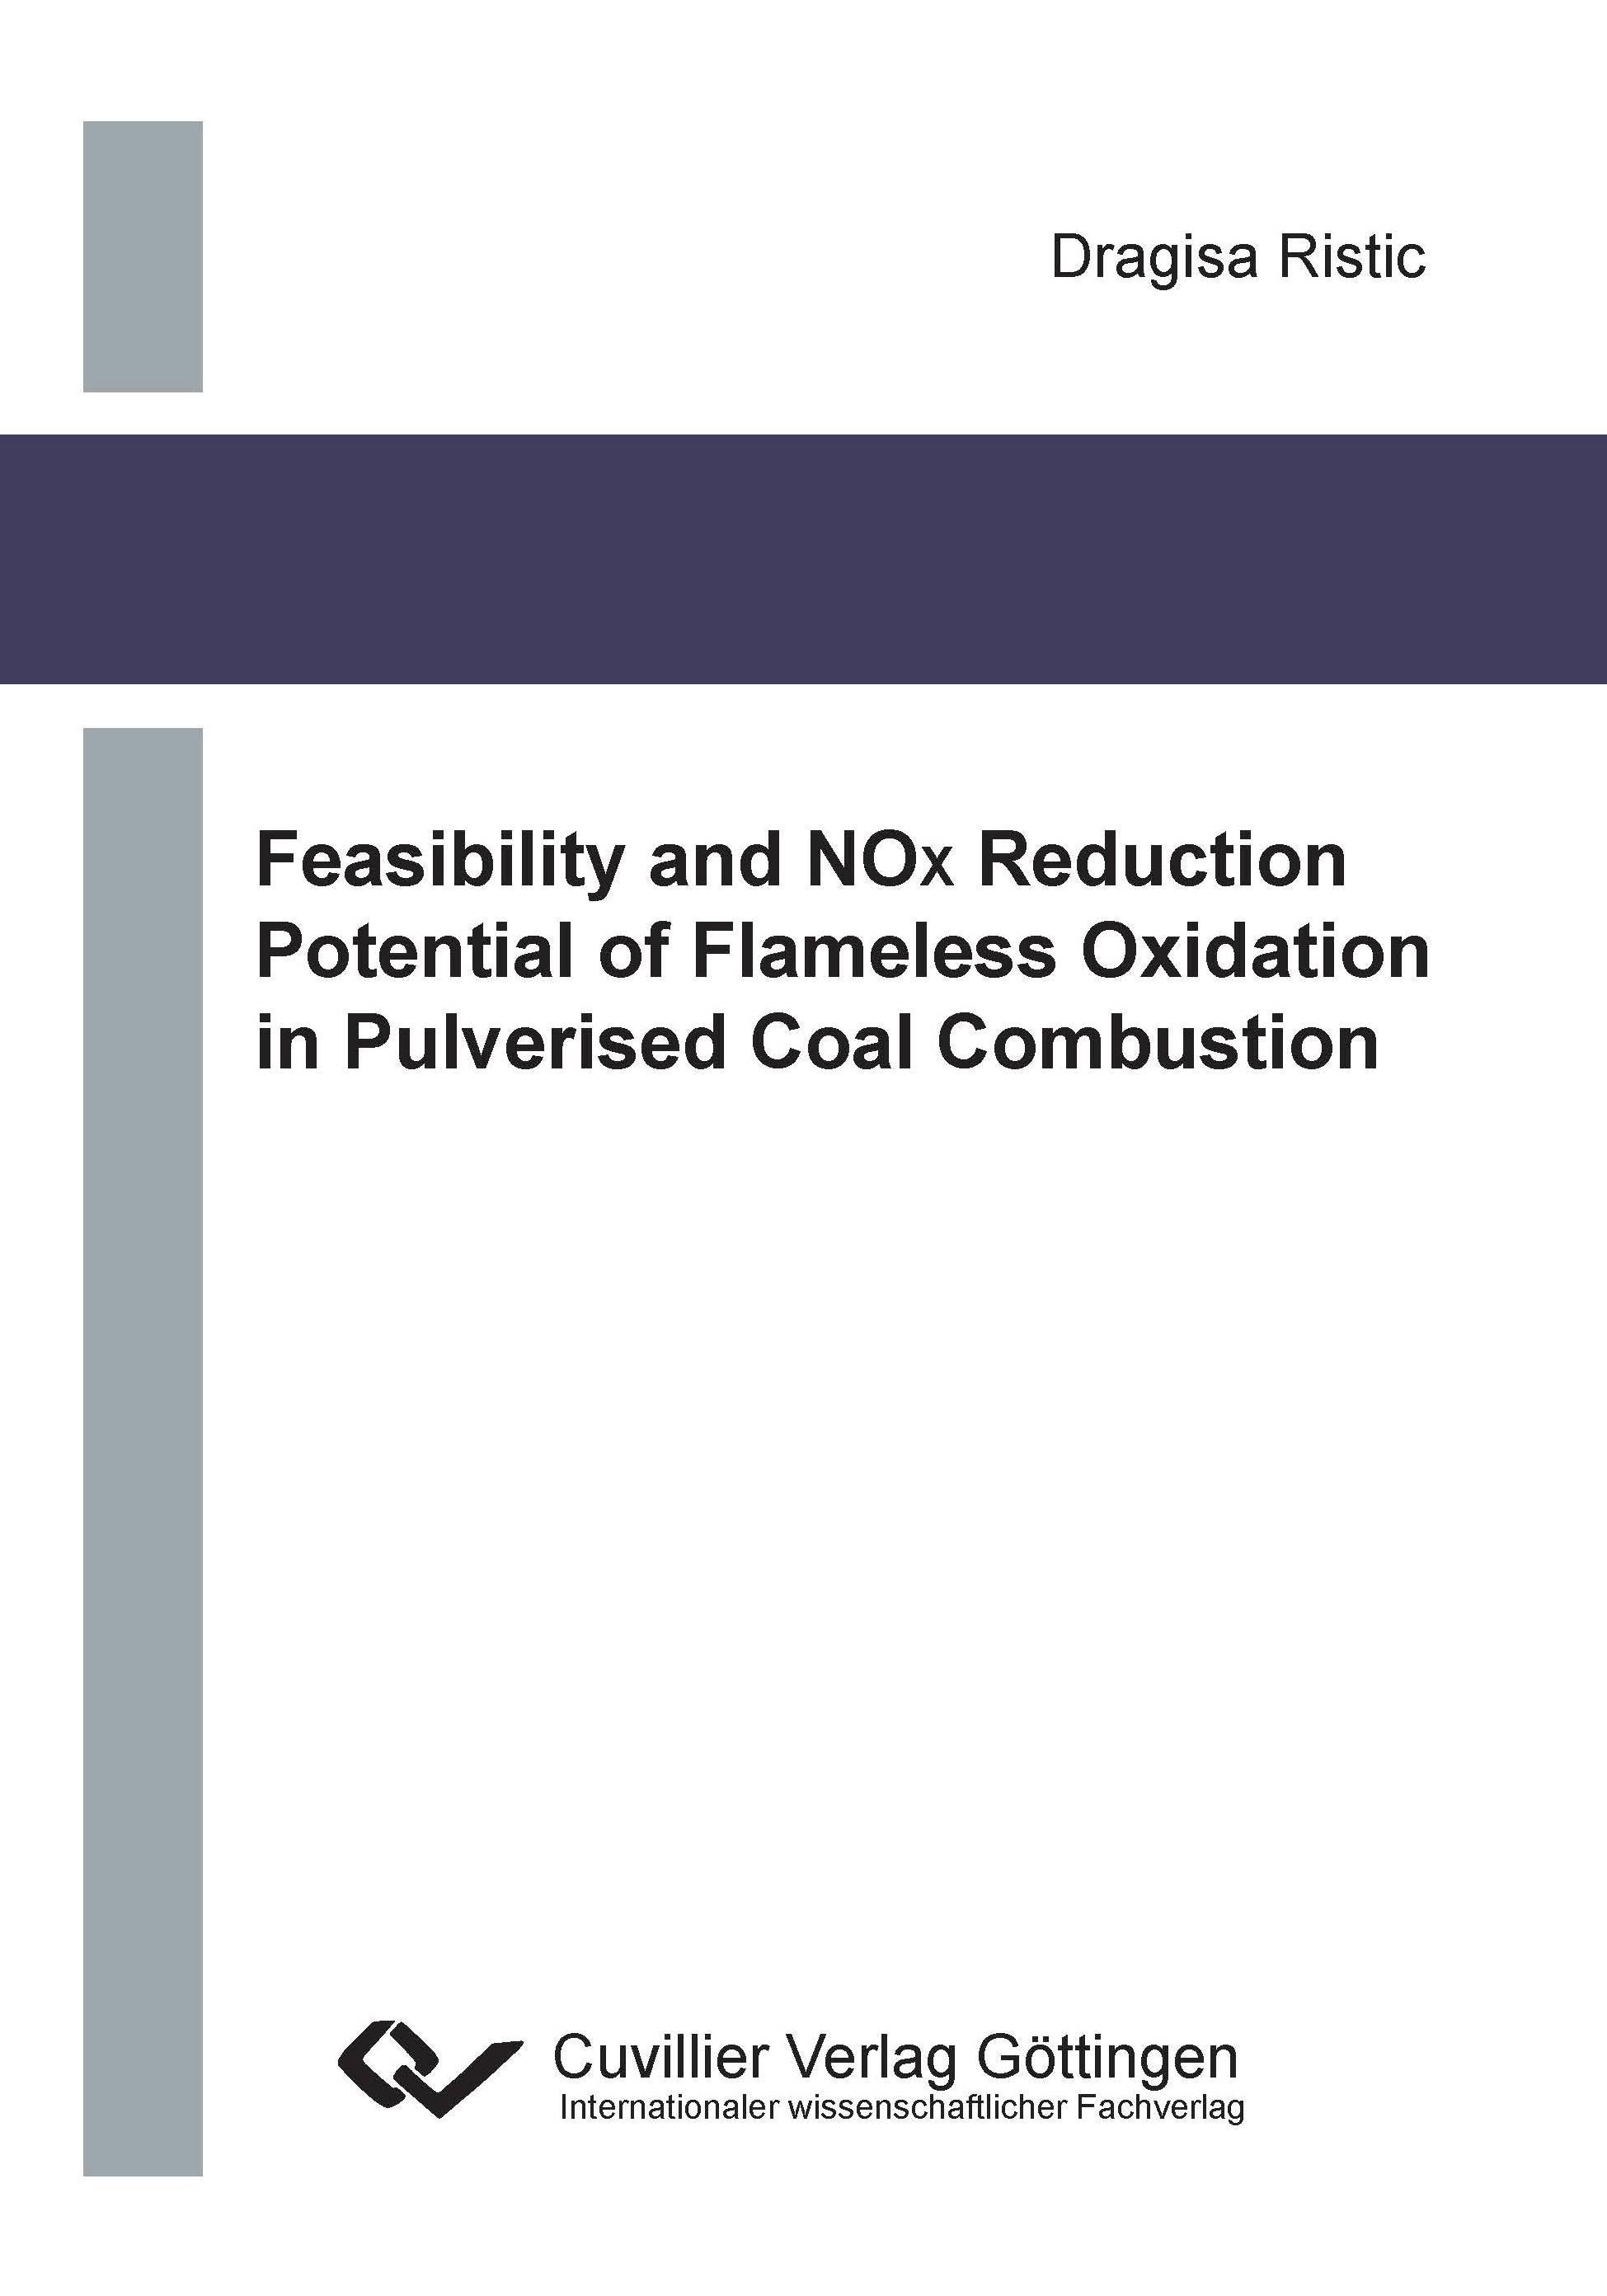 Feasibility and NOx Reduction Potential of Flameless Oxidation in Pulverised Coal Combustion - Ristic, Dragisa